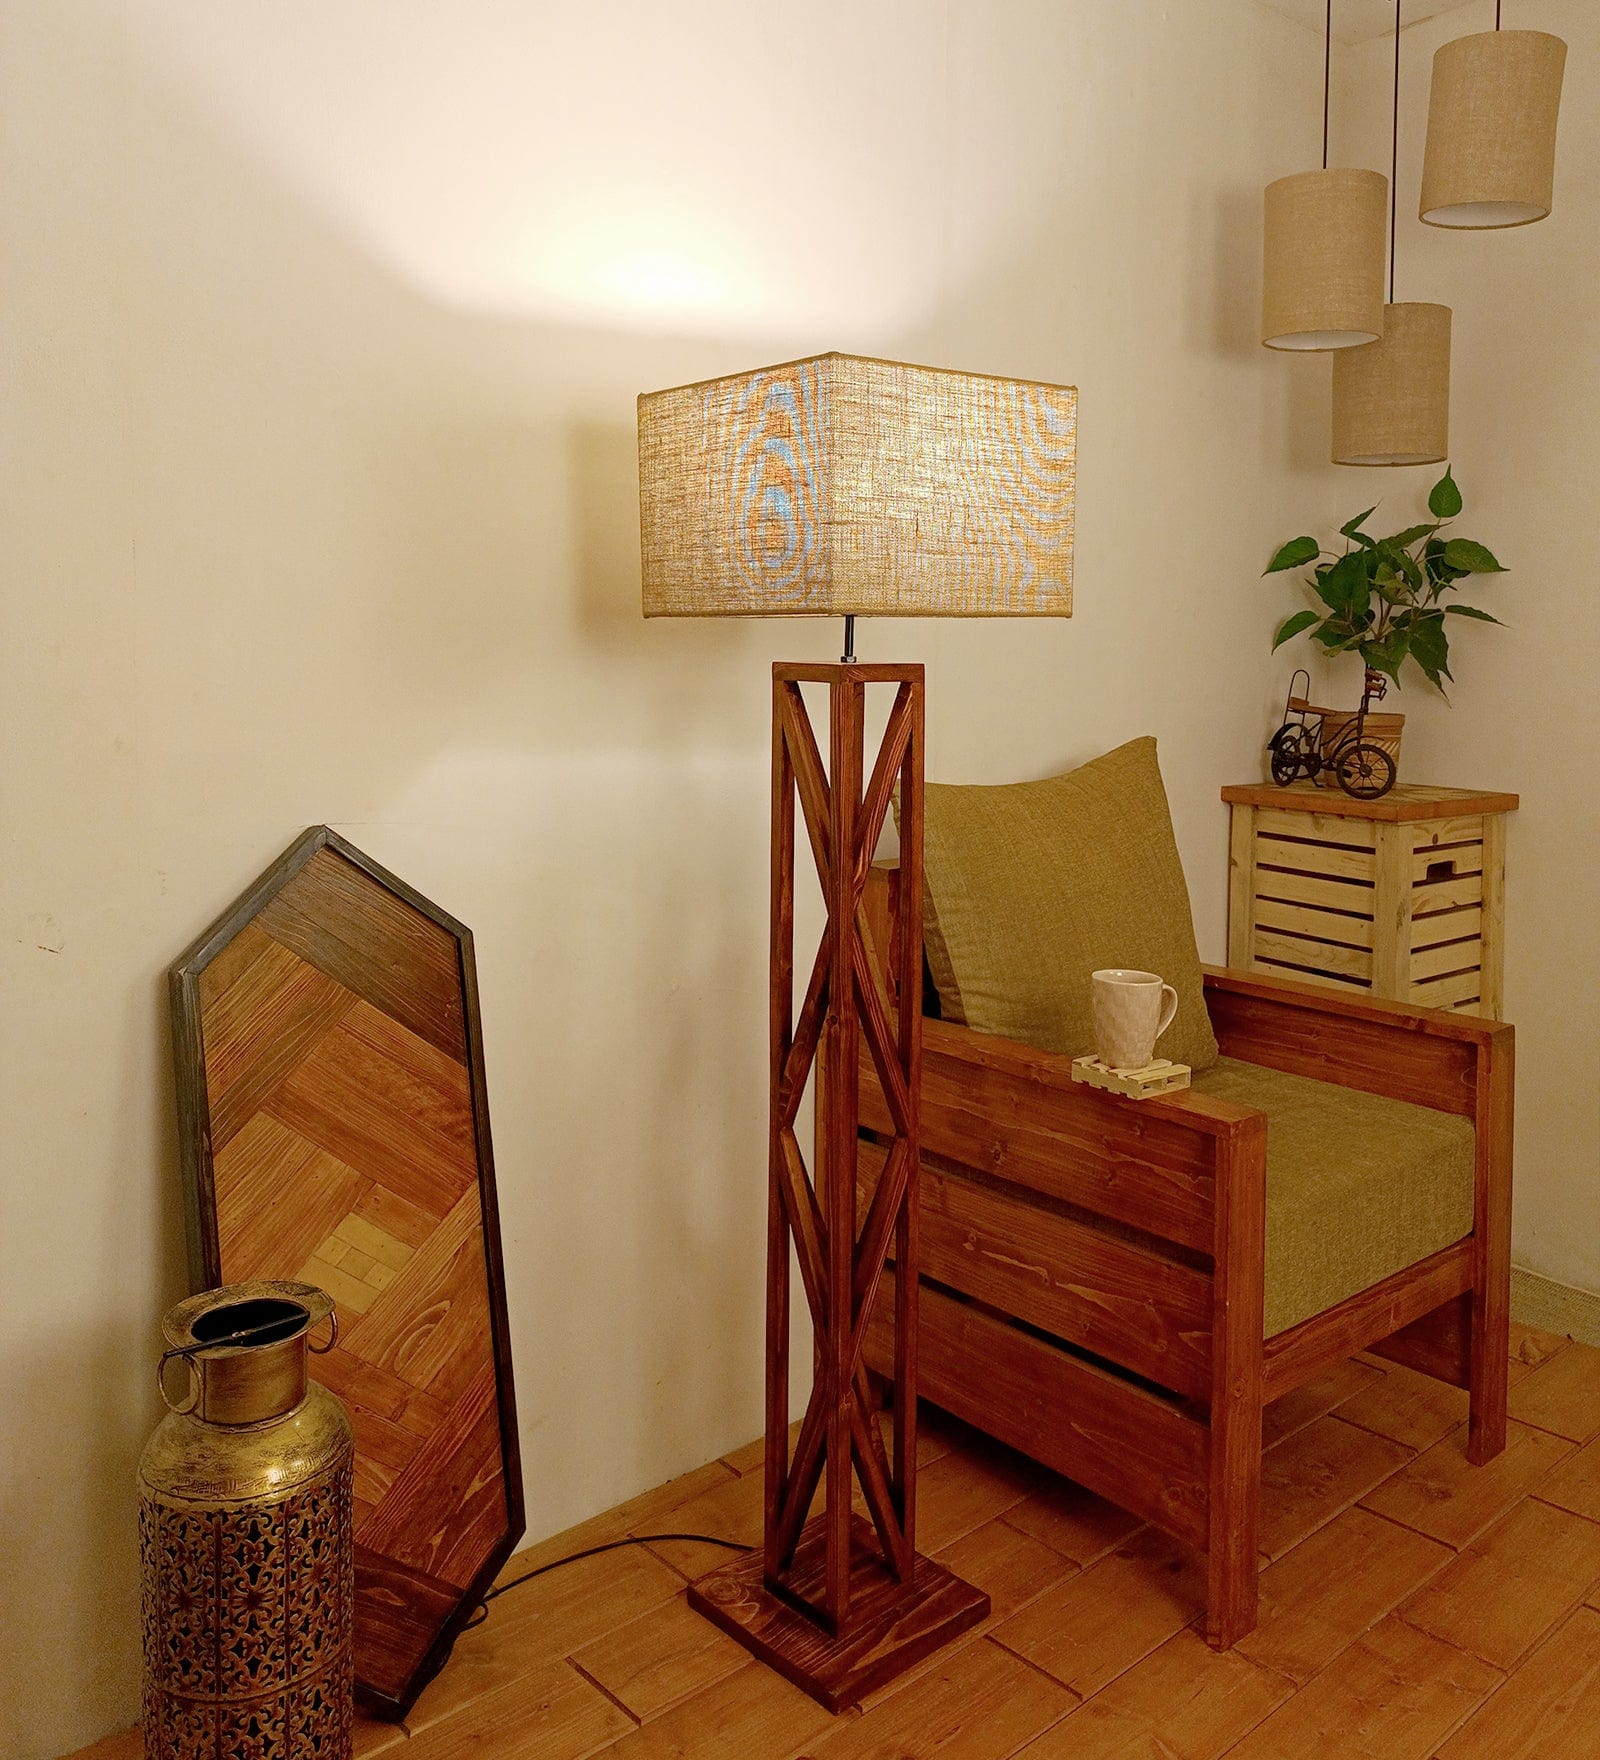 Symmetric Wooden Floor Lamp with Premium Beige Fabric Lampshade (BULB NOT INCLUDED)